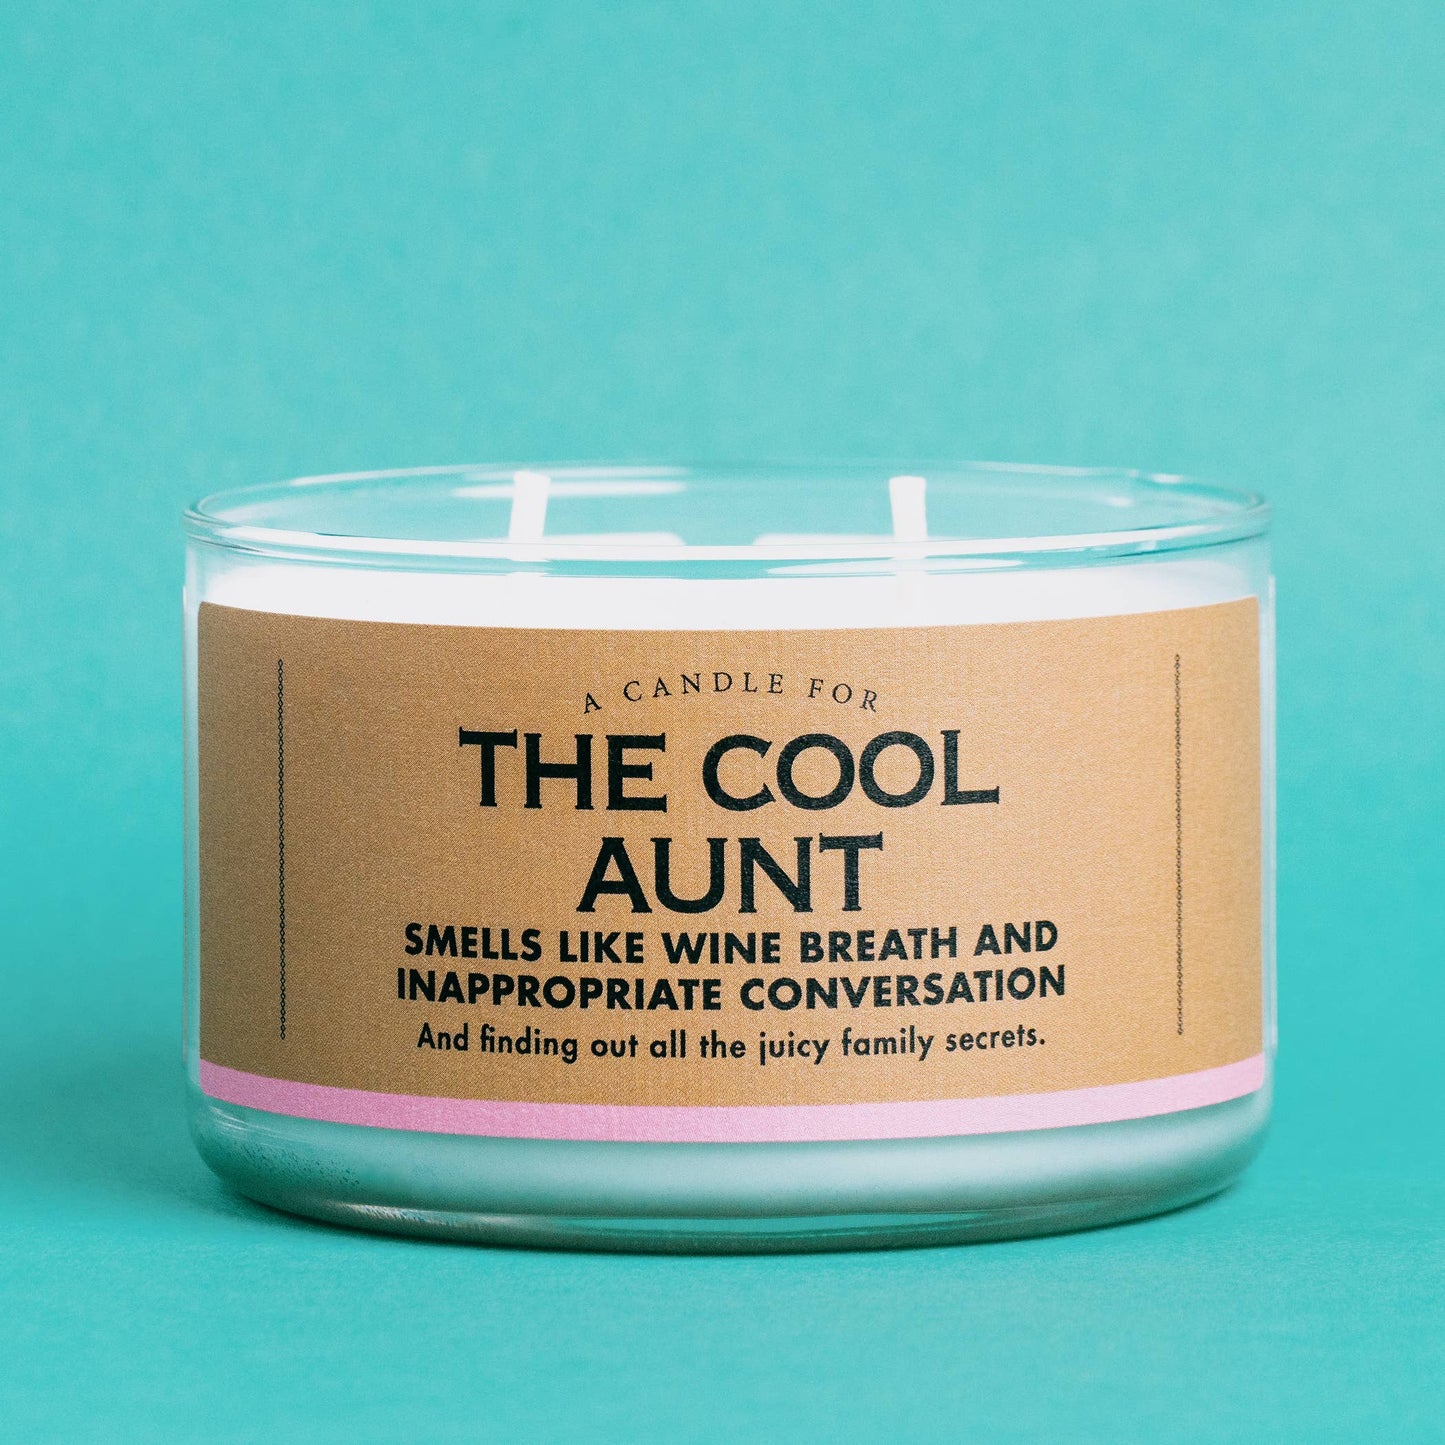 A Candle for the Cool Aunt | Funny Candle